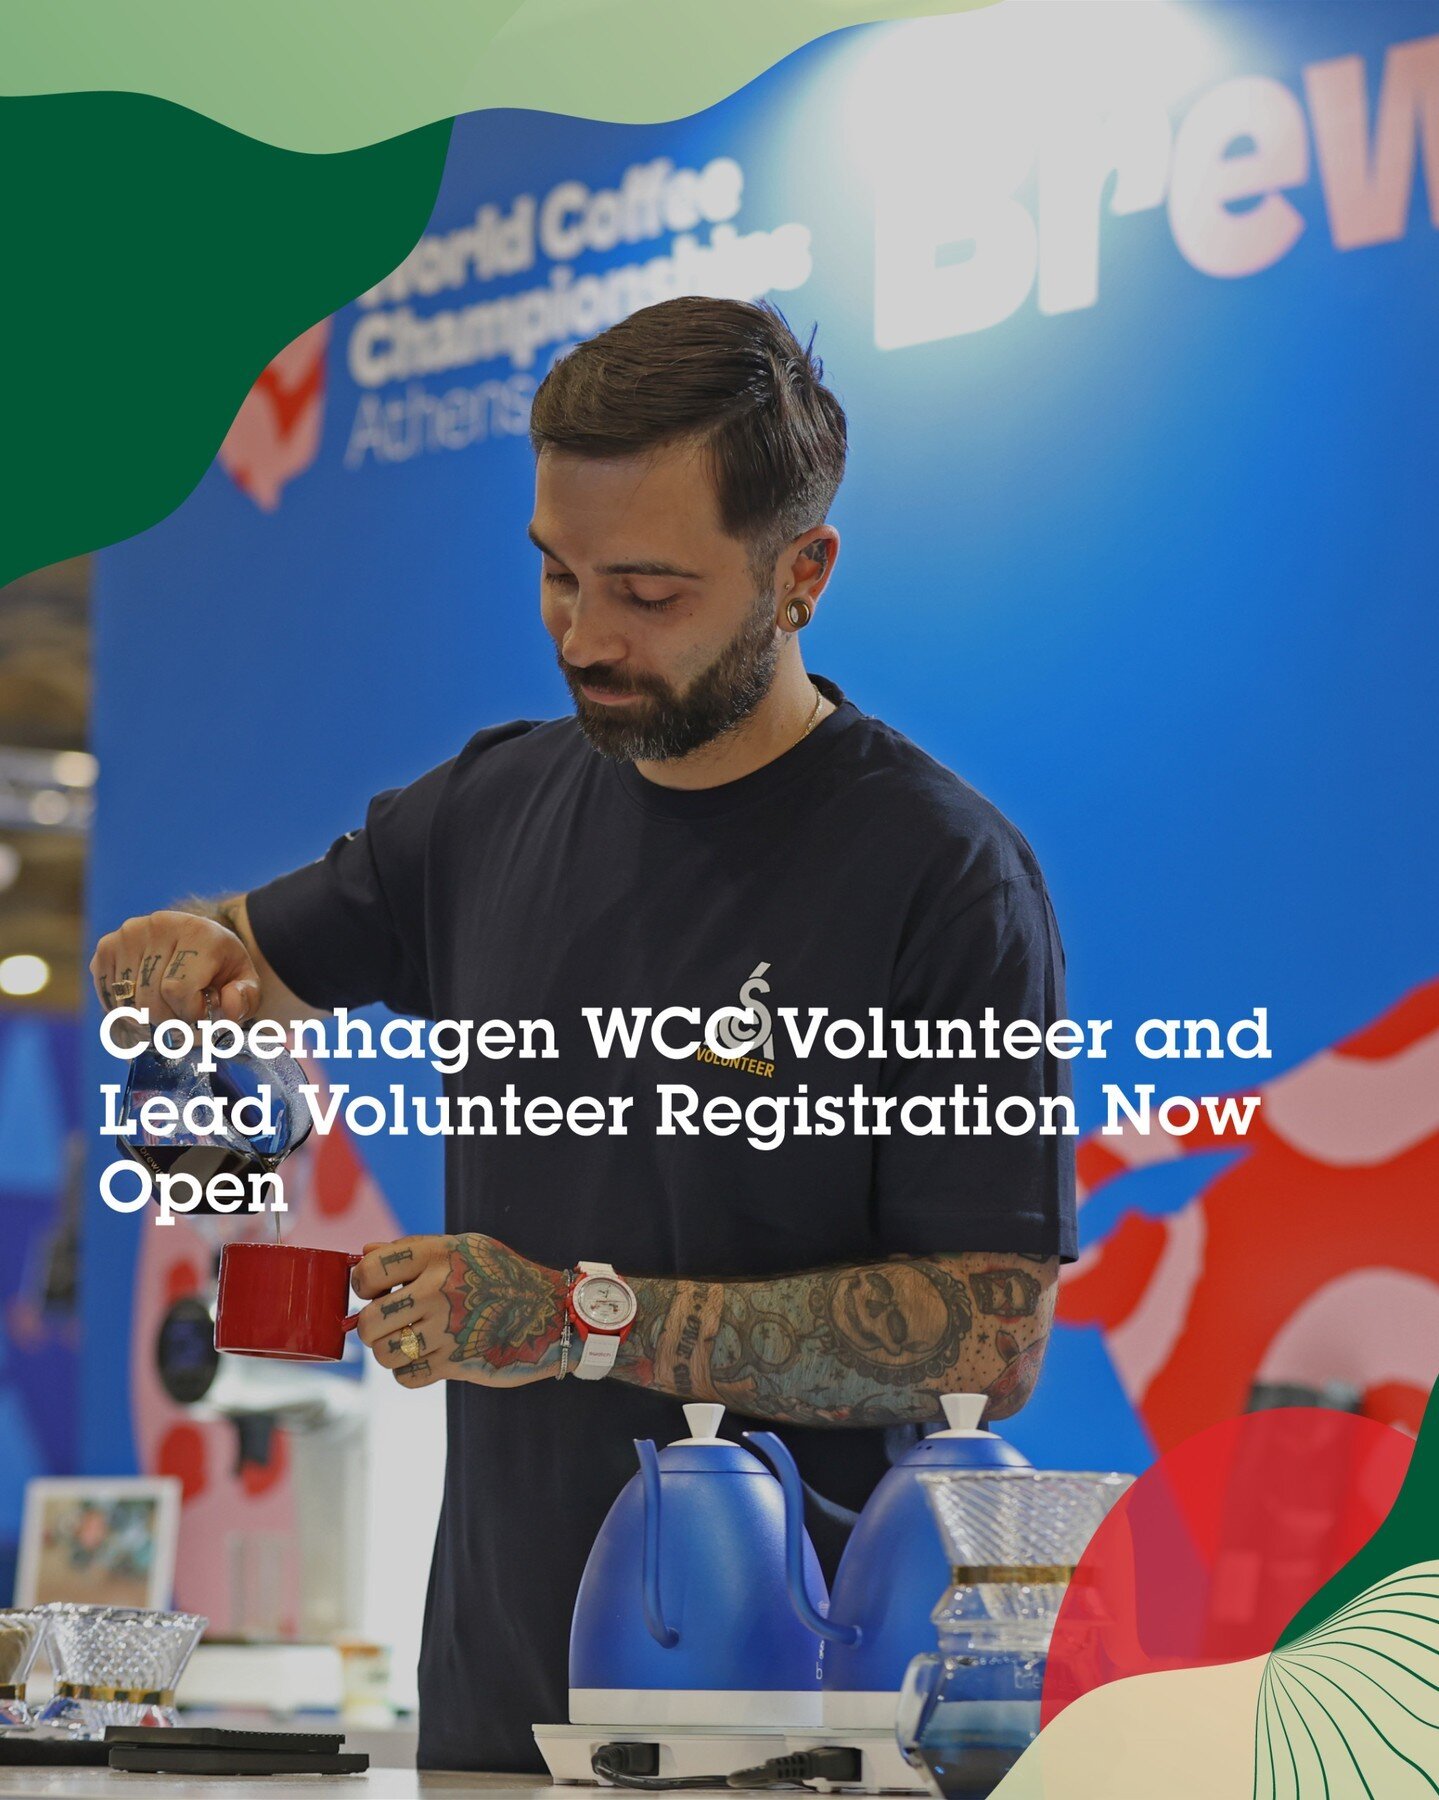 Are you passionate about coffee and looking to expand your global network or want to gain valuable skills? Join us in Copenhagen for the World Coffee Championships (WCC) and earn a three-day World of Coffee show badge.

As a volunteer, you'll have th